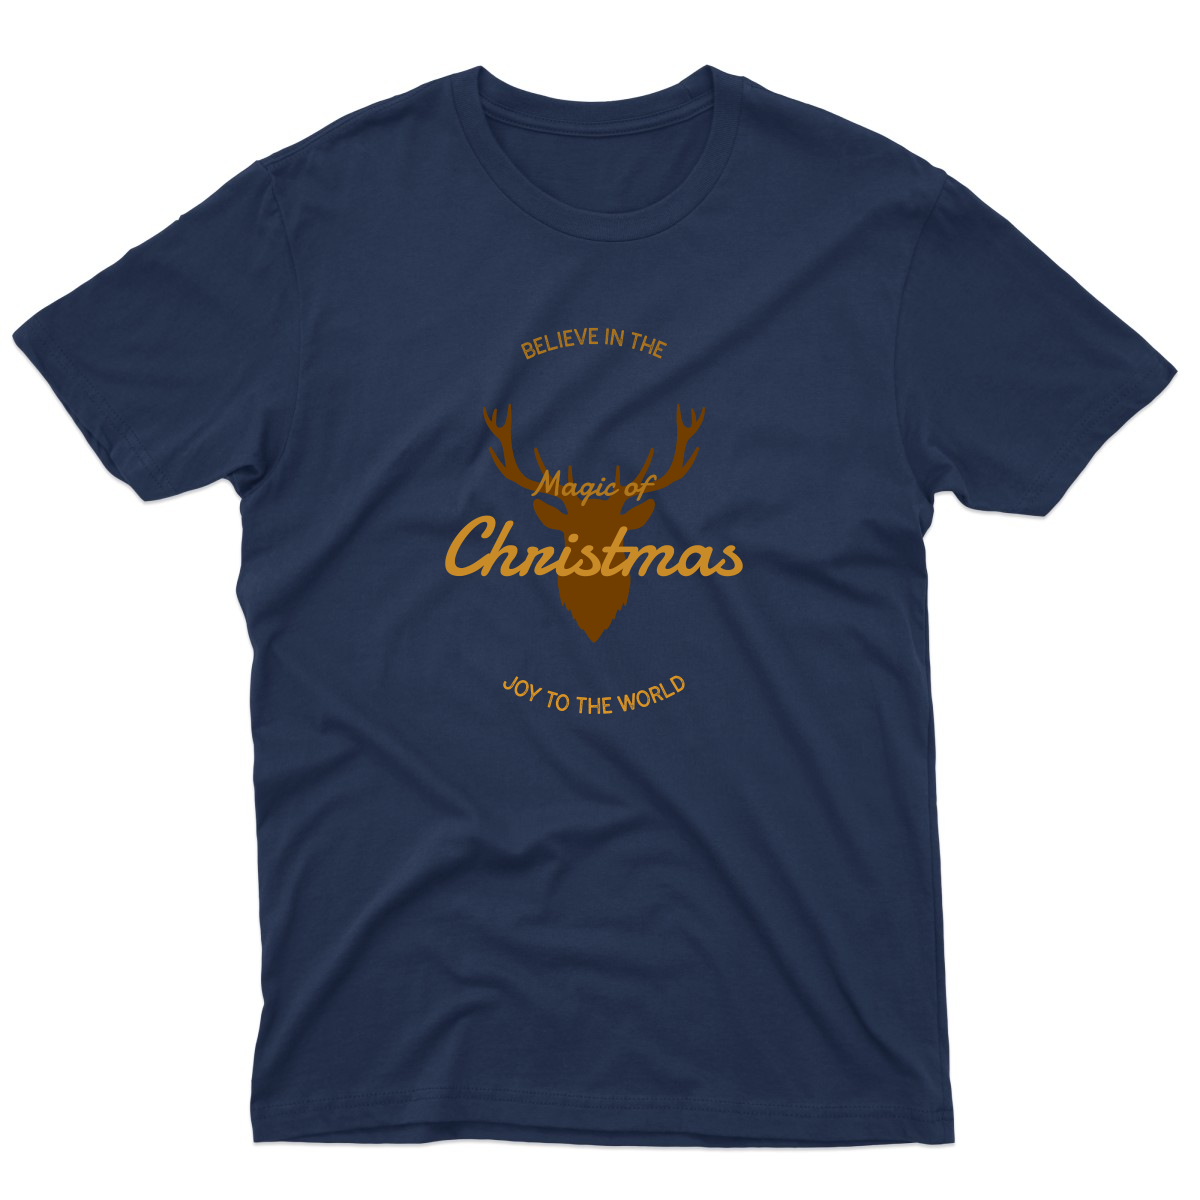 Believe in the Magic of Christmas Joy to the World Men's T-shirt | Navy